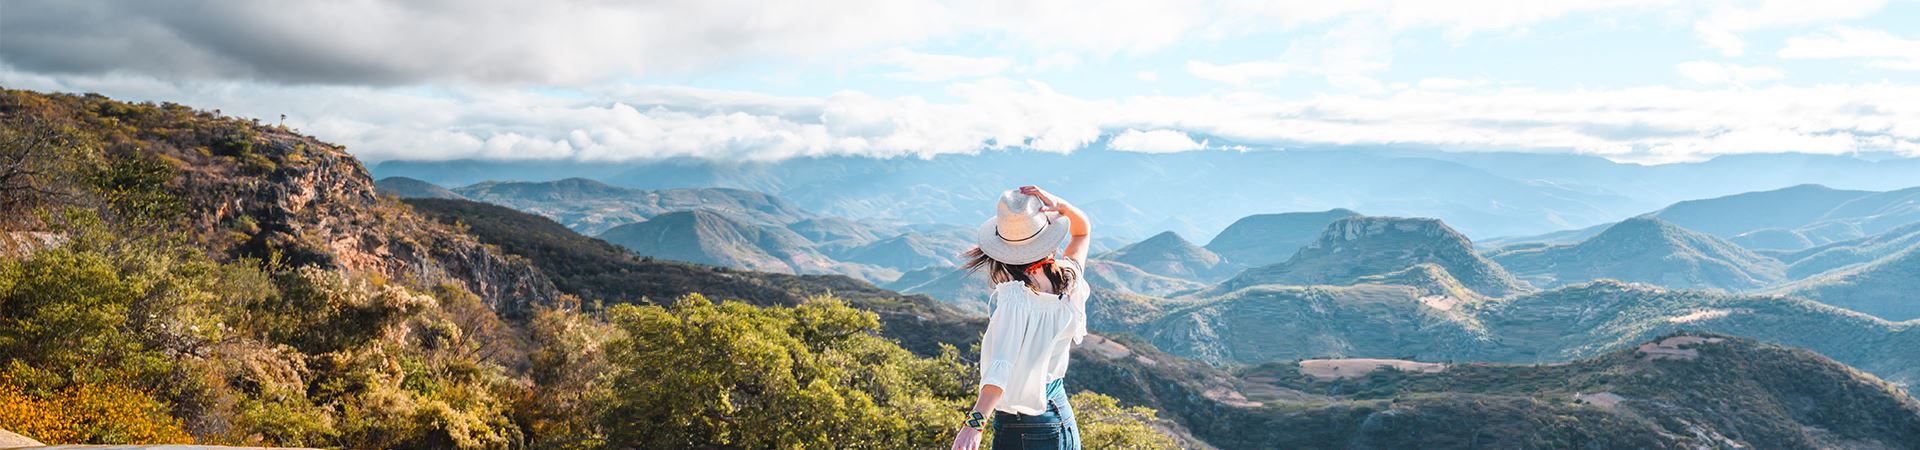 Landscapes of vast mountainous area, with clouds hanging over the top of the mountains. In the foreground you can see a girl, with her back towards the objective, watching the landscape. Her right hand is holding a beige hat with a wide brim. The brown hair is loose and shoulder-length. She wears a white, half-sleeve blouse and blue jeans. On her left wrist she wears a wide, colorful bracelet.